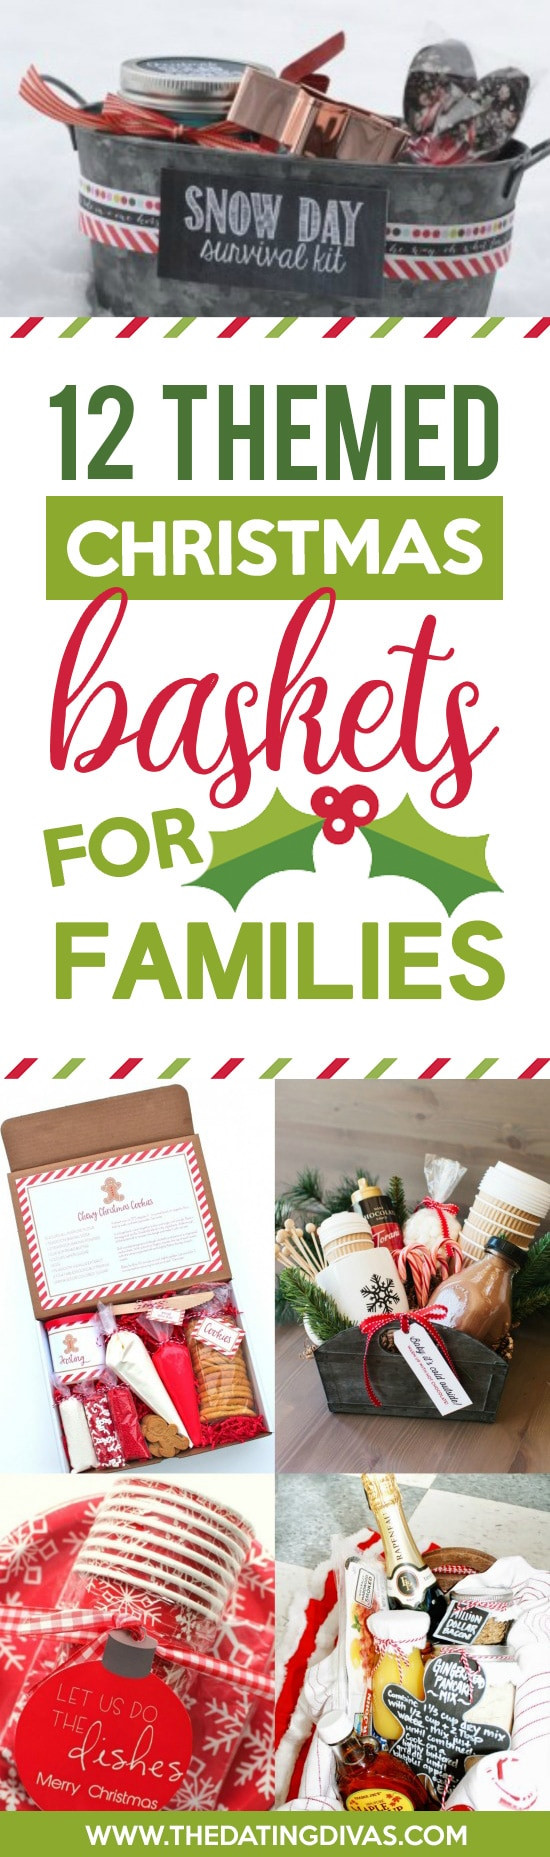 Christmas Gift Basket Ideas For Families
 50 Themed Christmas Basket Ideas The Dating Divas